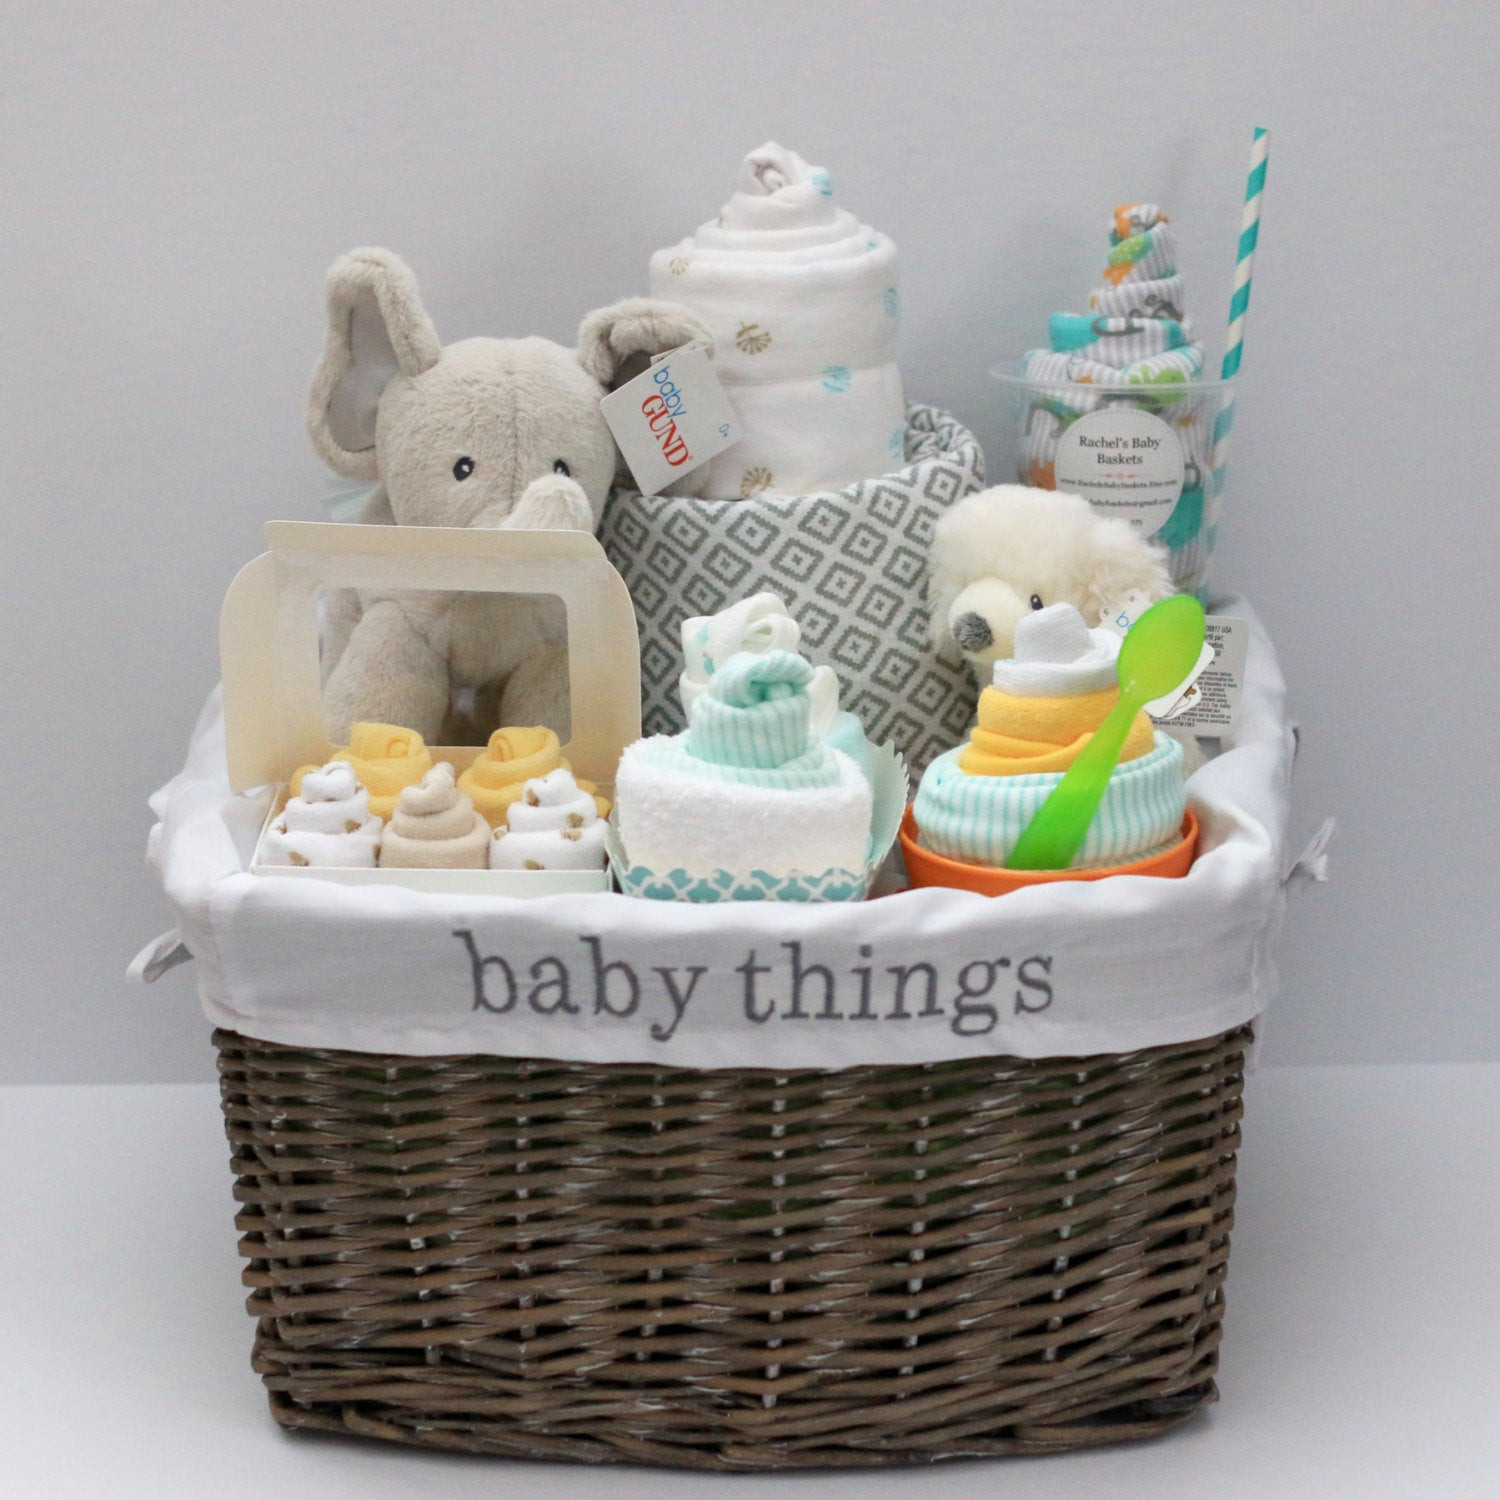 Baby Gift Ideas For Girls
 Gender Neutral Baby Gift Basket Baby Shower Gift Unique Baby